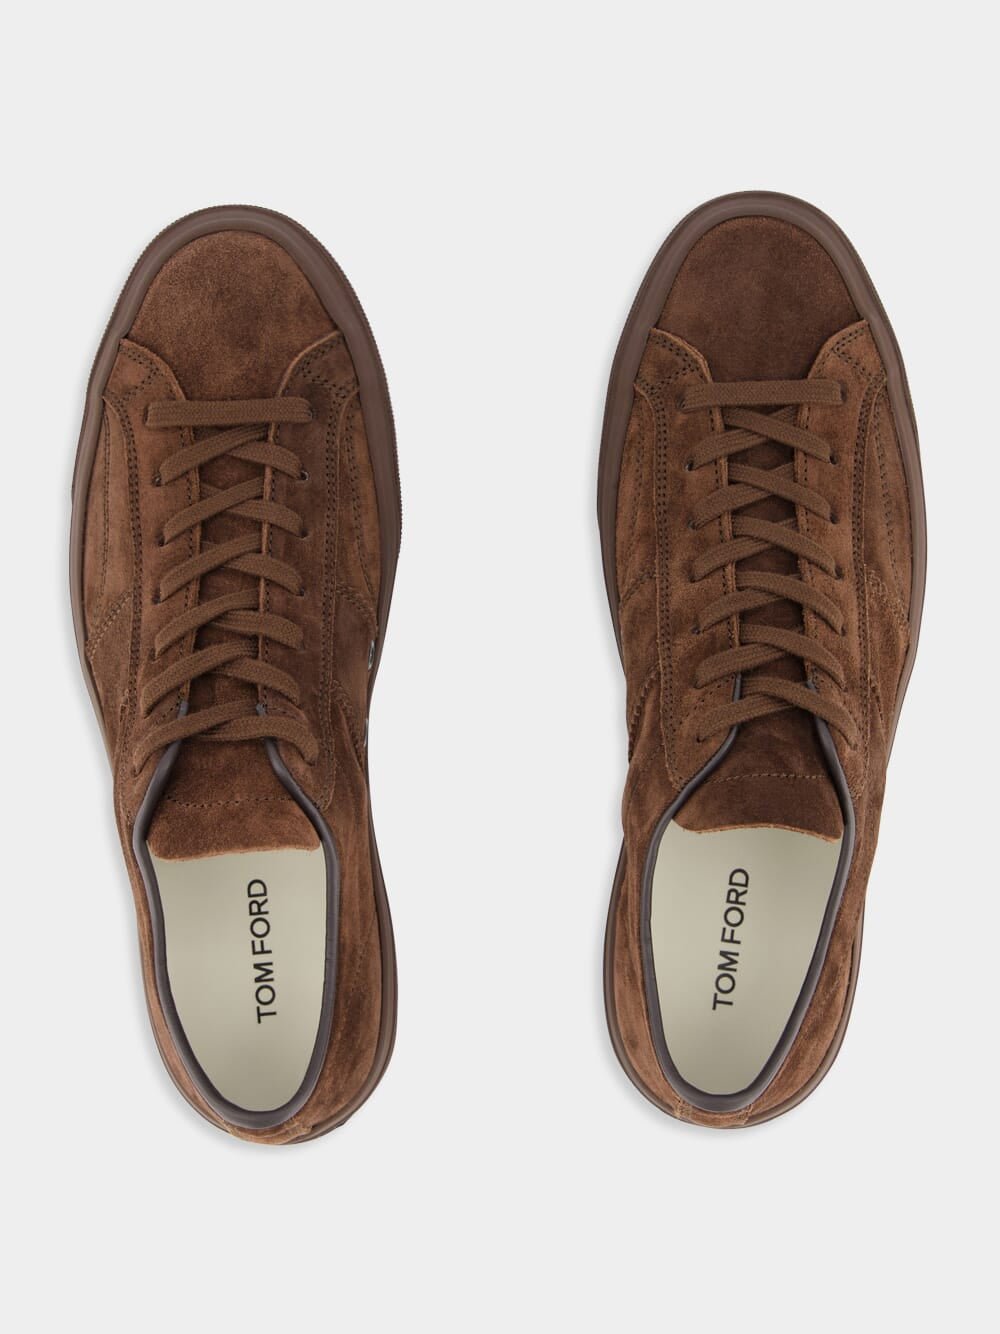 Tom FordBrown Suede Low-Top Sneakers at Fashion Clinic